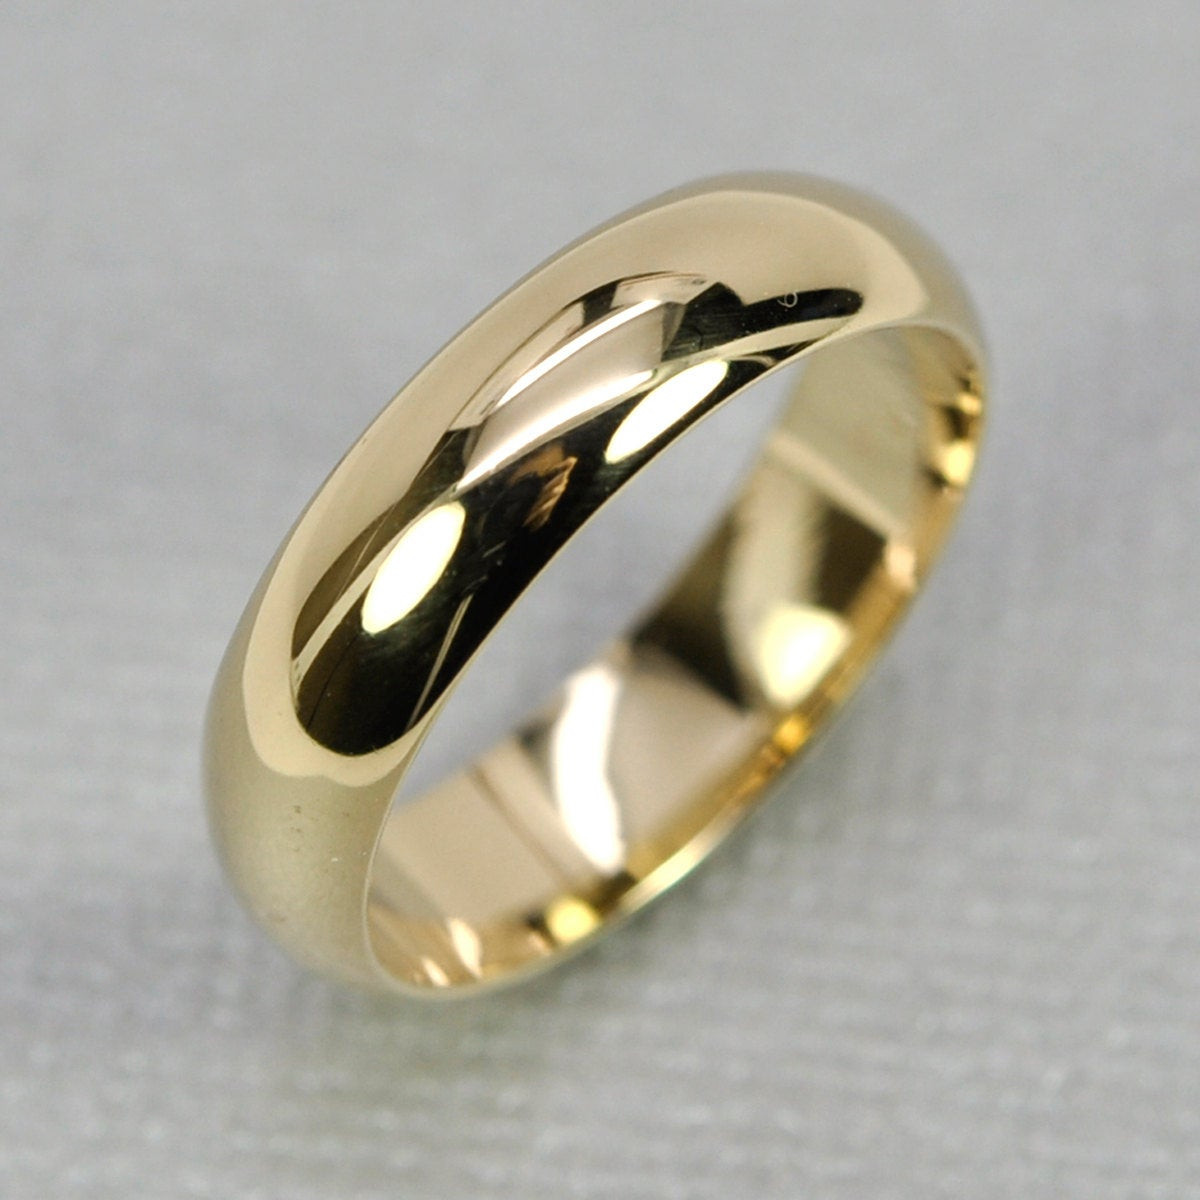 Yellow Gold Wedding Bands For Men
 14K Yellow Gold Mens Wedding Band Half Round Classic Shape 5 x